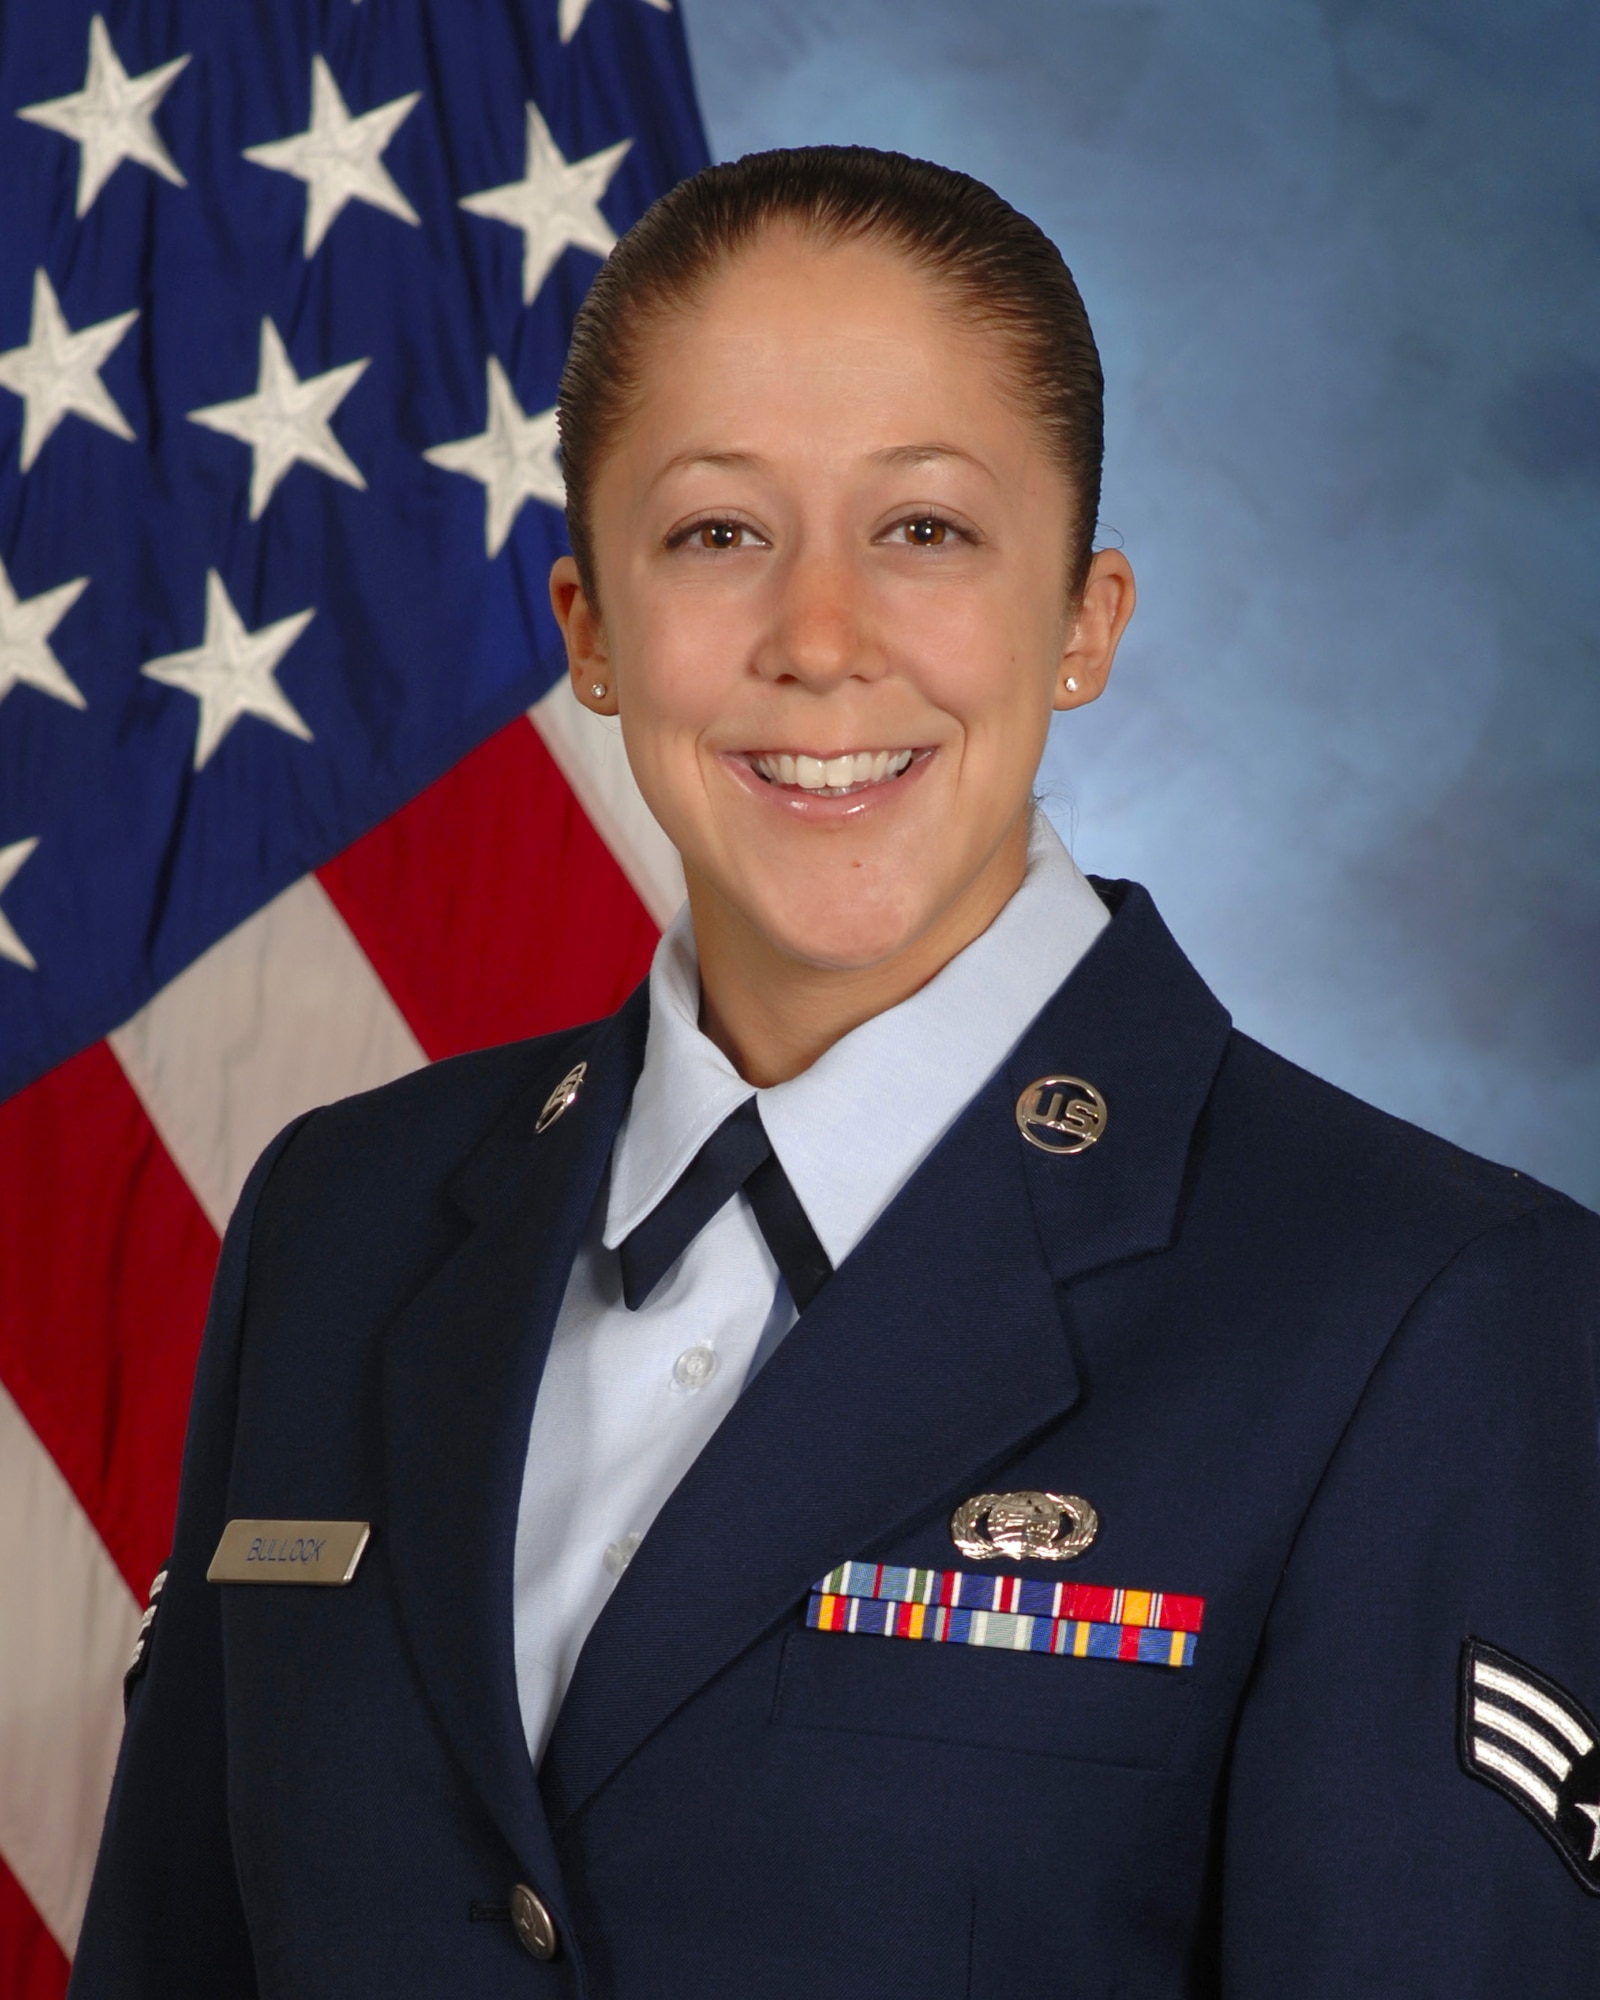 Senior Airman Mary Bullock, an imagery analyst with the 11th Intelligence Squadron at Hurlburt Field, is the 2007 Air Force Special Operations Command Airman of the Year. (U.S. Air Force photo)